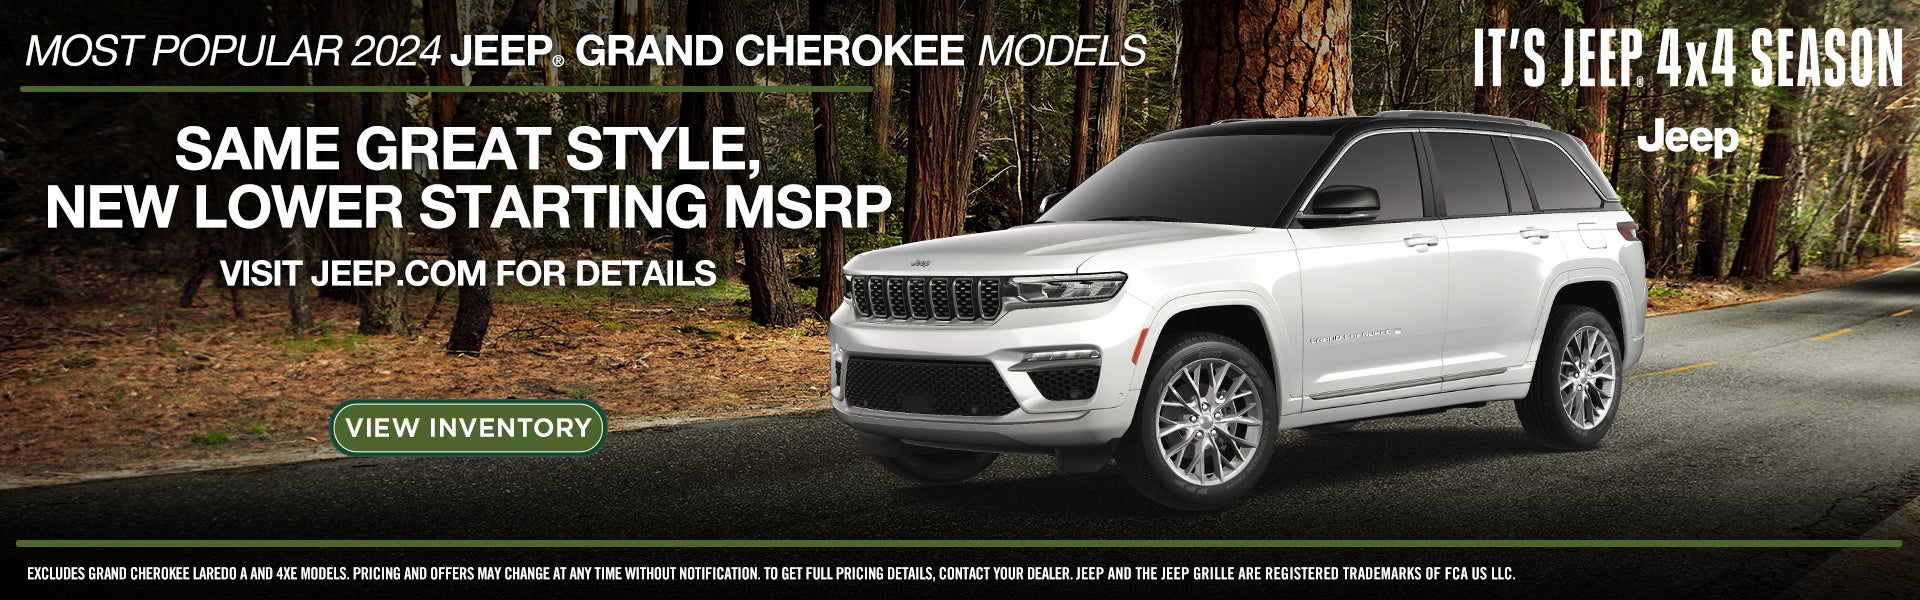 24 Jeep Grand Cherokee Offer